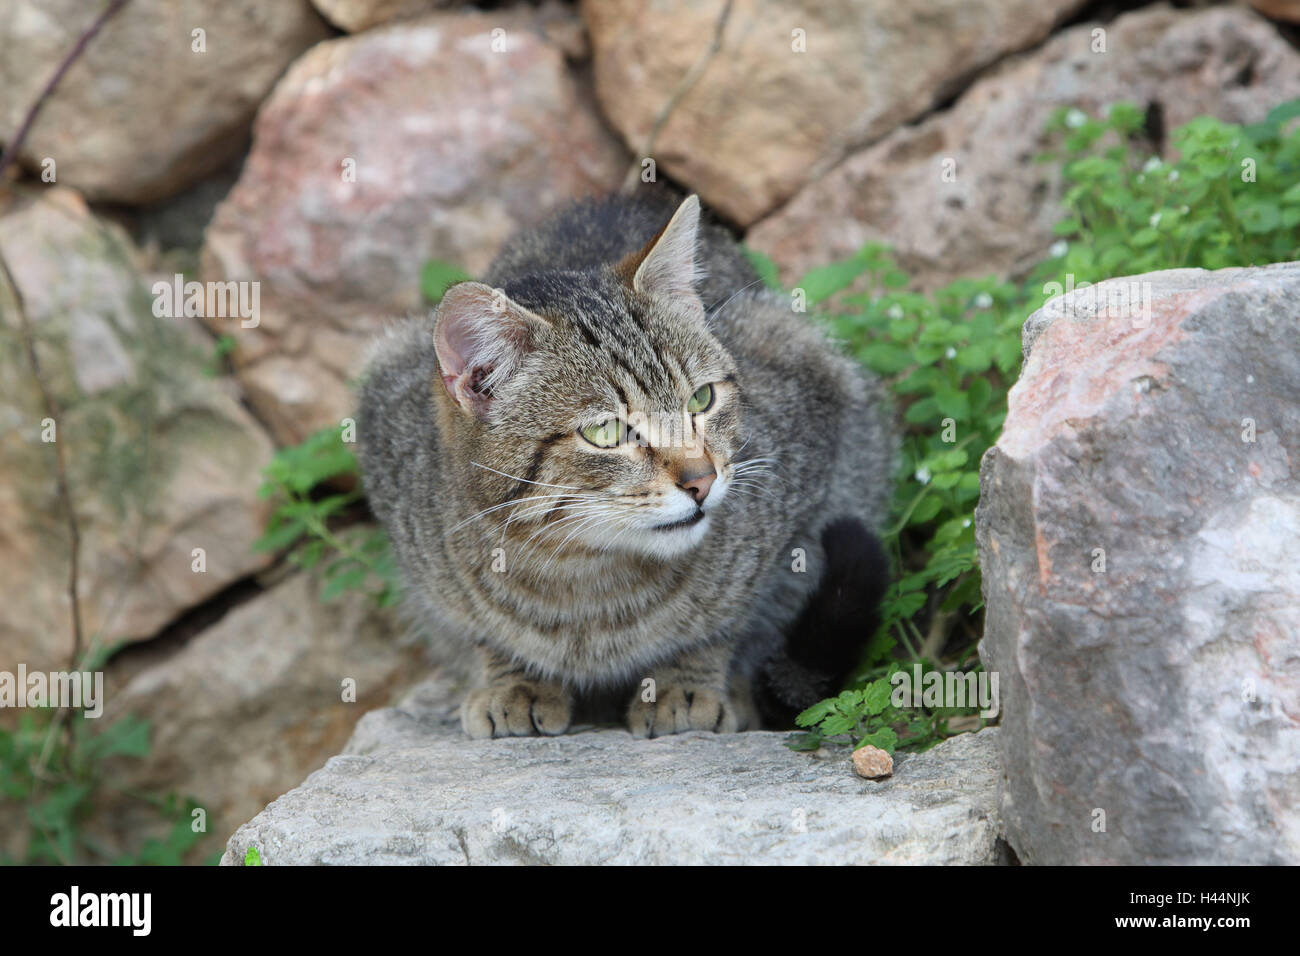 Cat, striped, crouch, stairs, animals, mammals, pets, small cats, Felidae, domesticate, house cat, without Lord, day release prisoners, stray, street cat, individually, only, outside, stone stairs, steps, Spain, Stock Photo